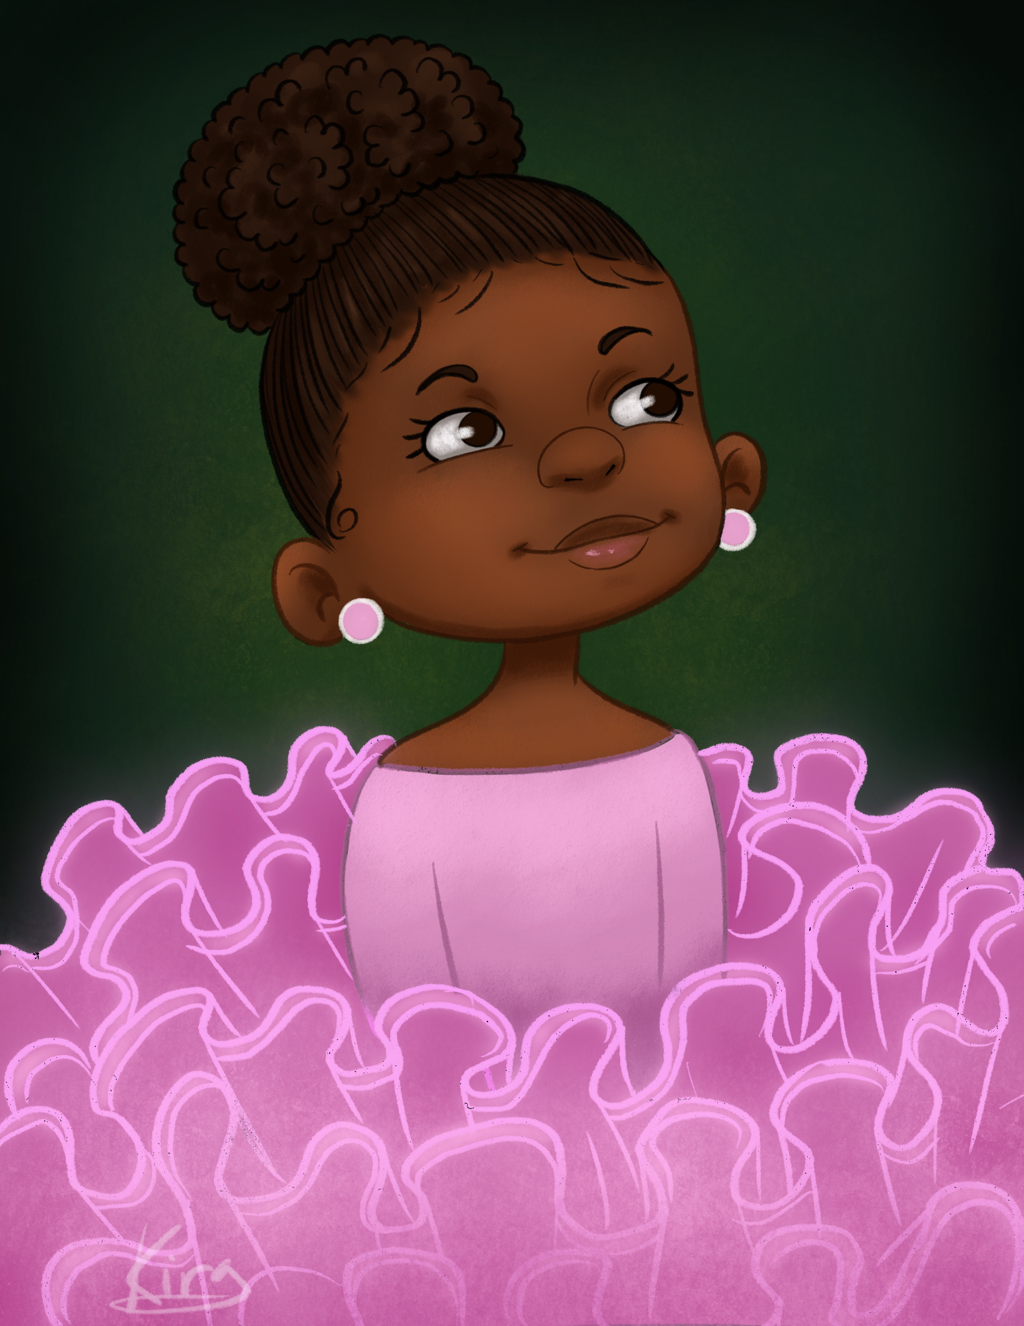 Illustration of a ballerina in a pink tutu in front of a green background